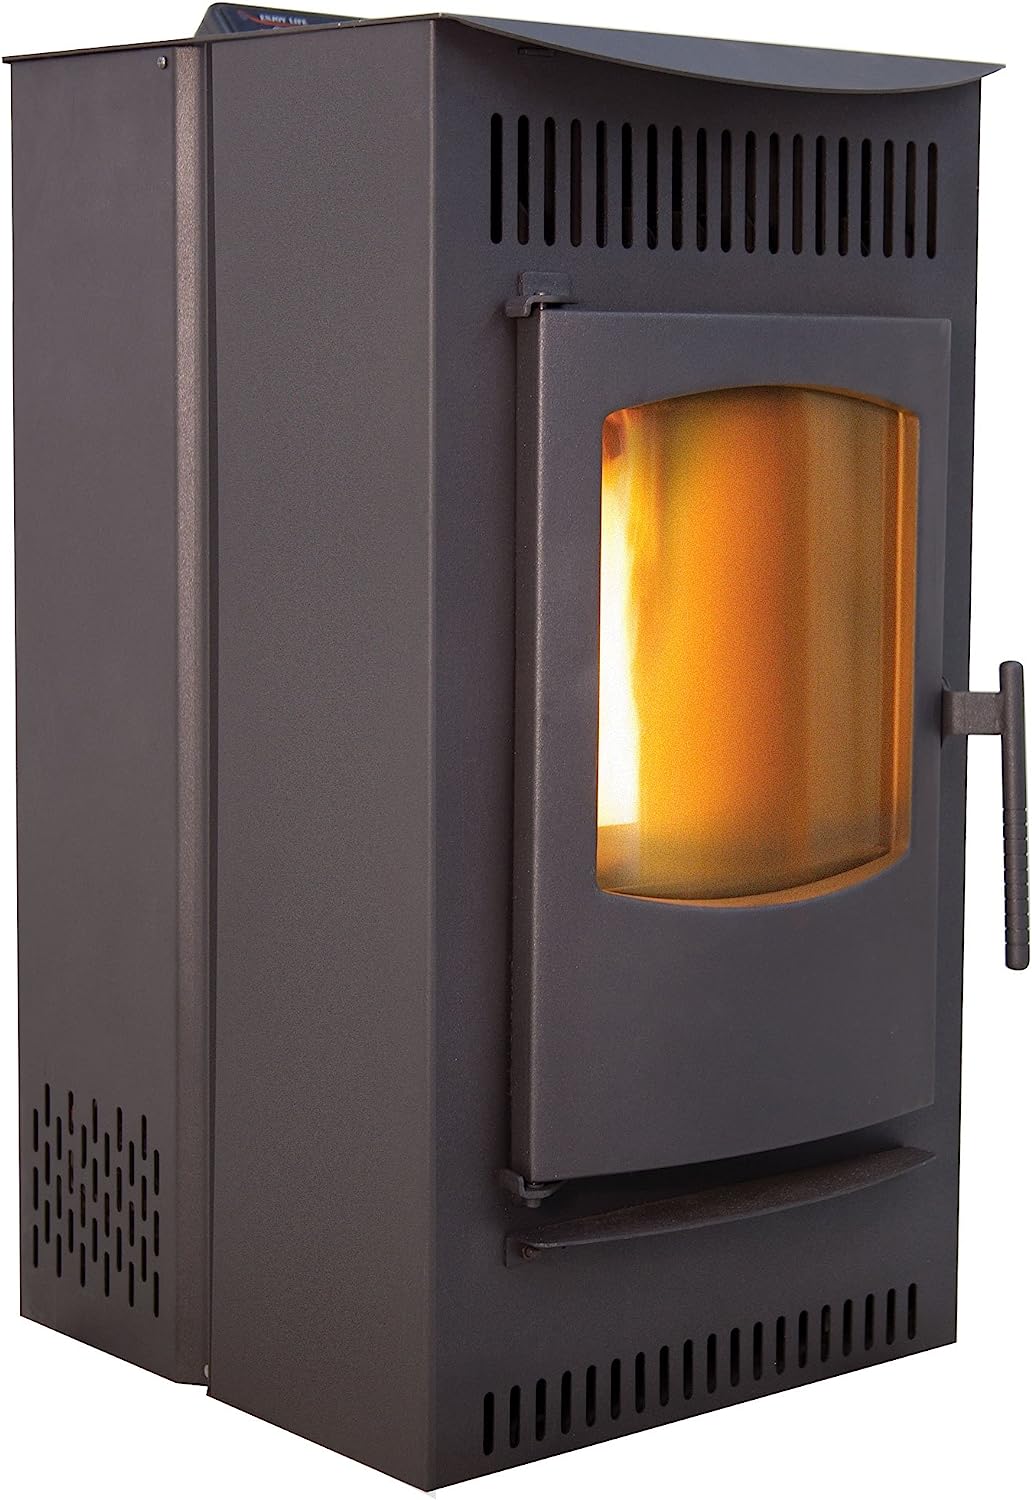 pellet stove brands detailed review